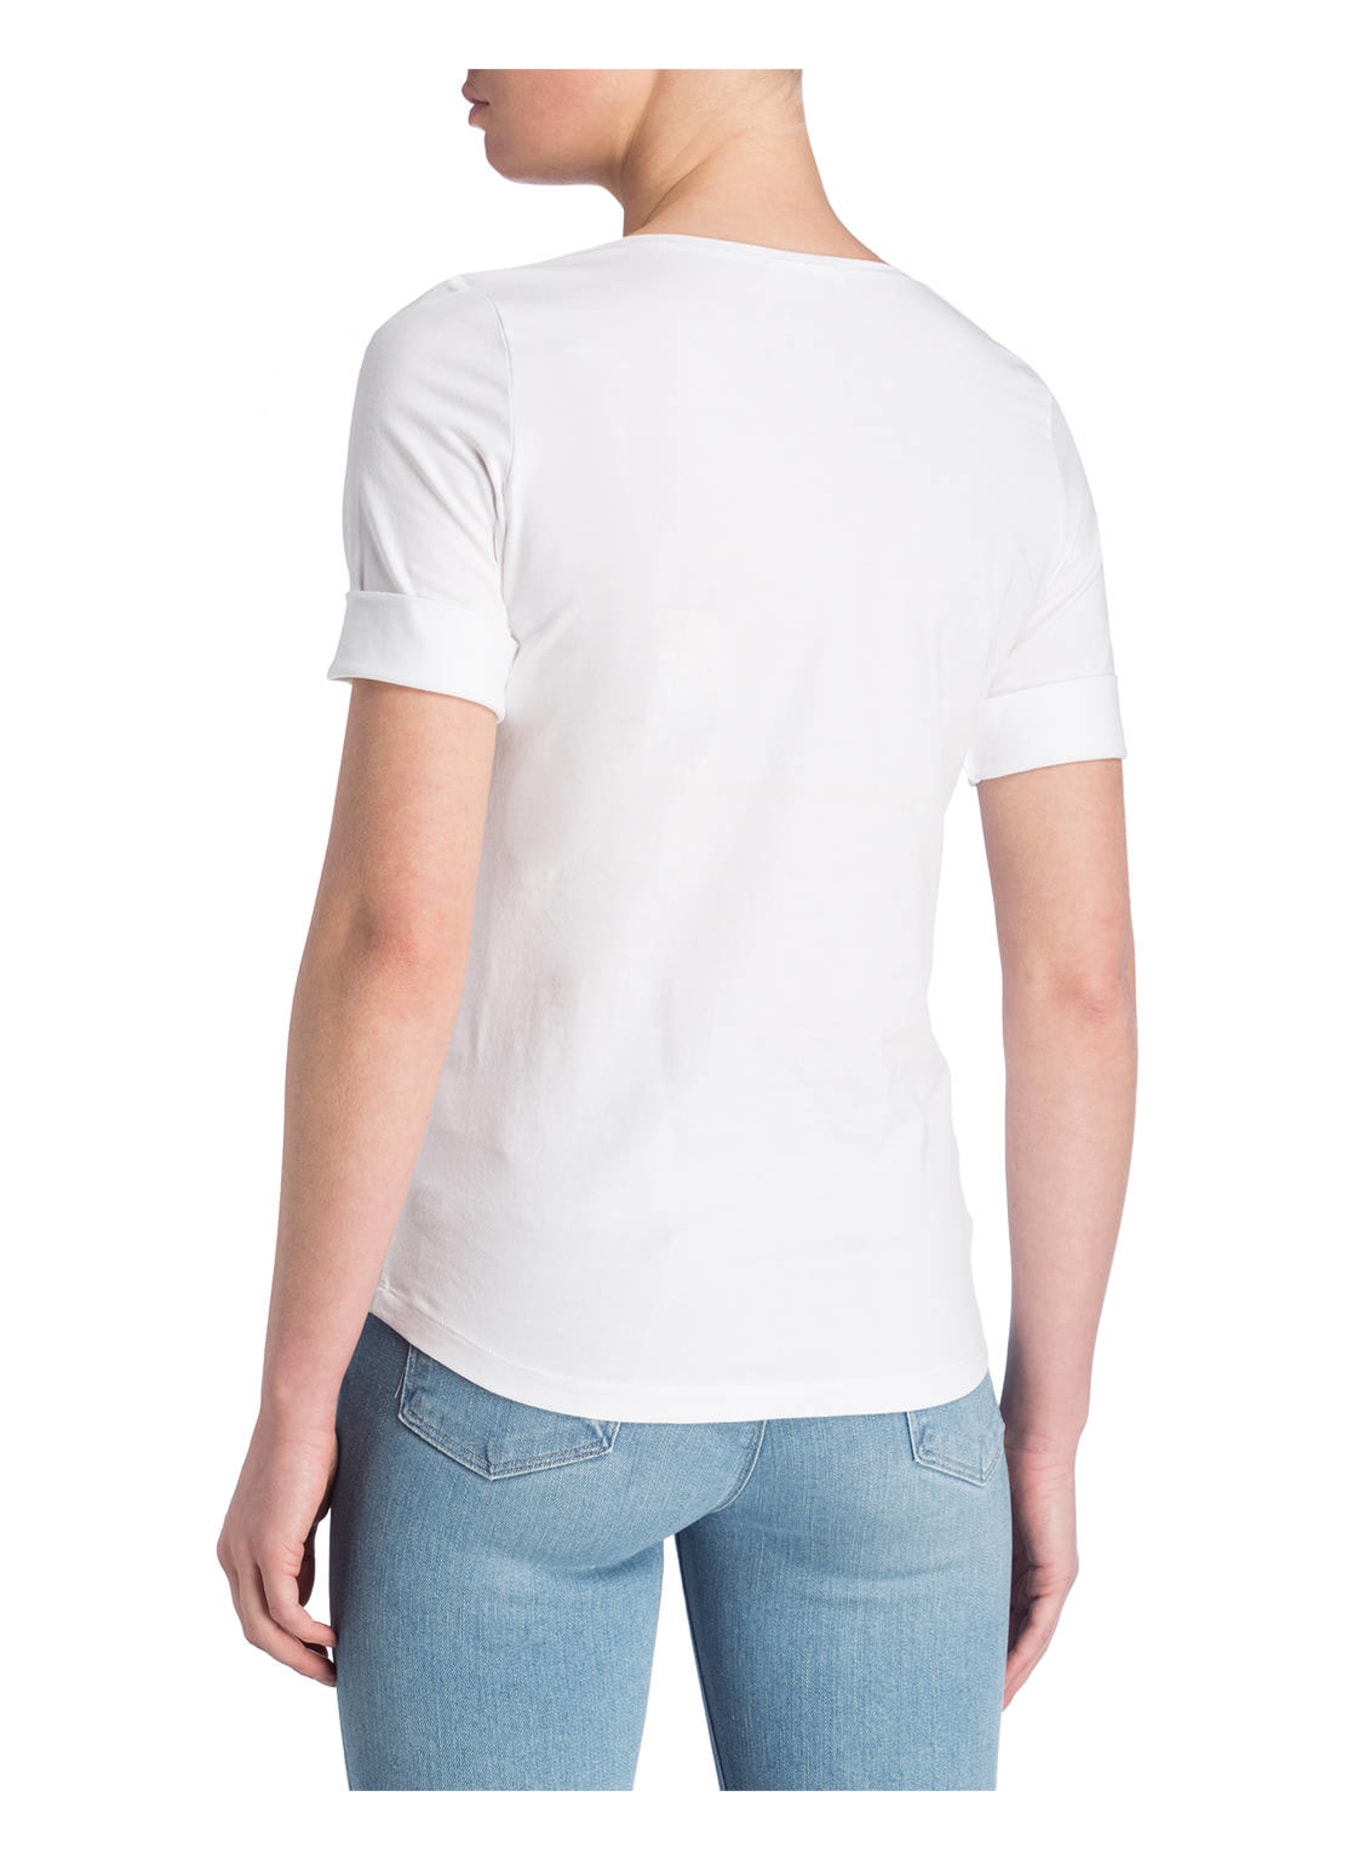 REPEAT T-shirt, Color: WHITE (Image 3)